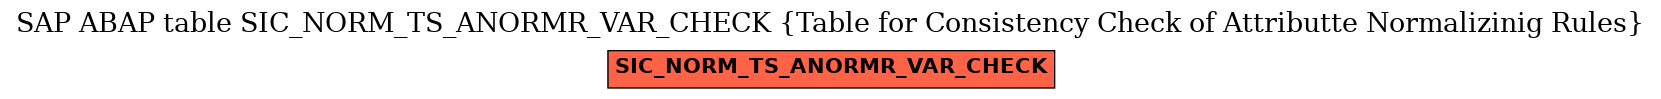 E-R Diagram for table SIC_NORM_TS_ANORMR_VAR_CHECK (Table for Consistency Check of Attributte Normalizinig Rules)